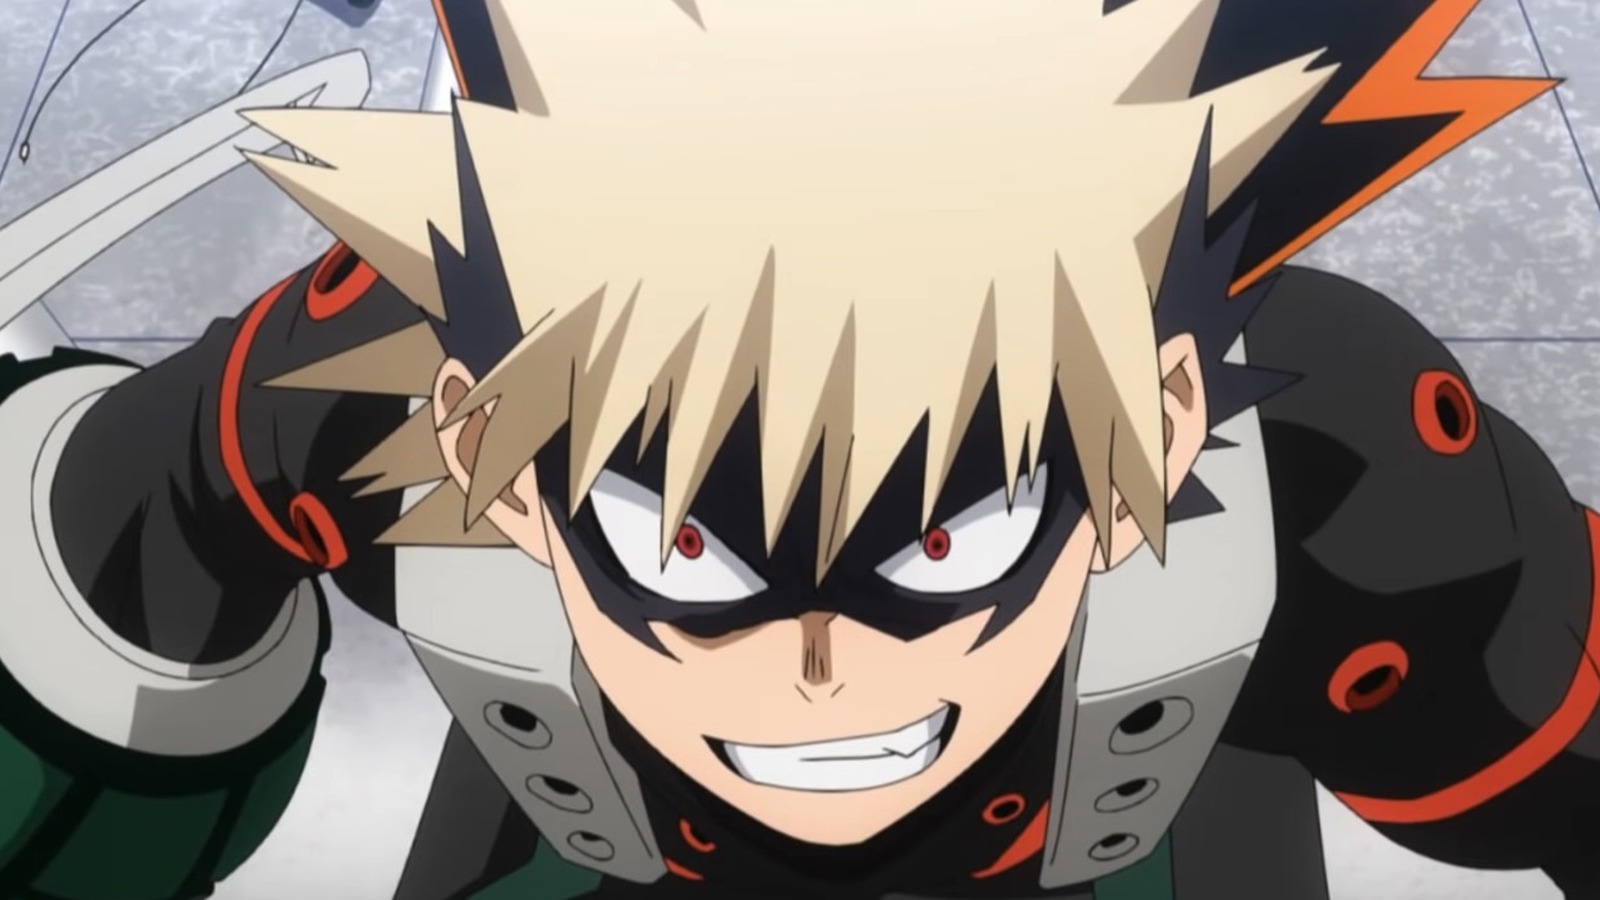 ashley aylott recommends pictures of bakugo from my hero academia pic